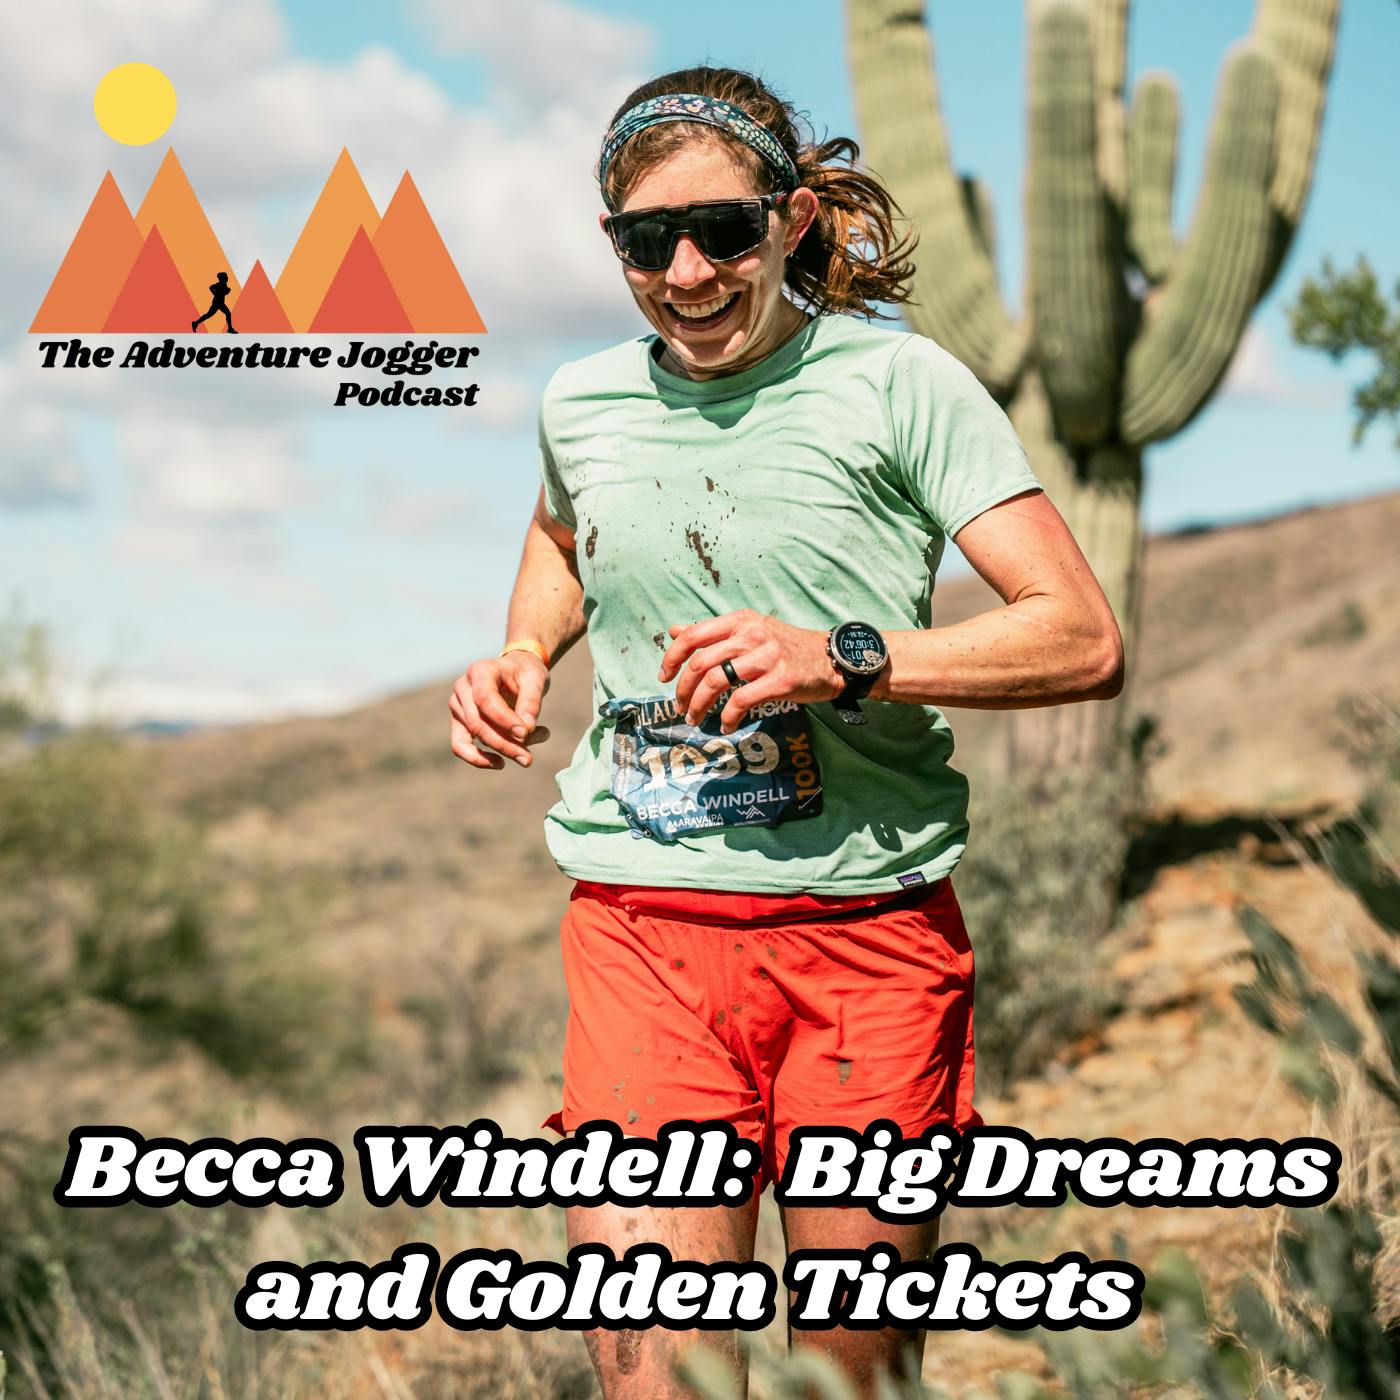 Becca Windell: Big Dreams and Golden Tickets